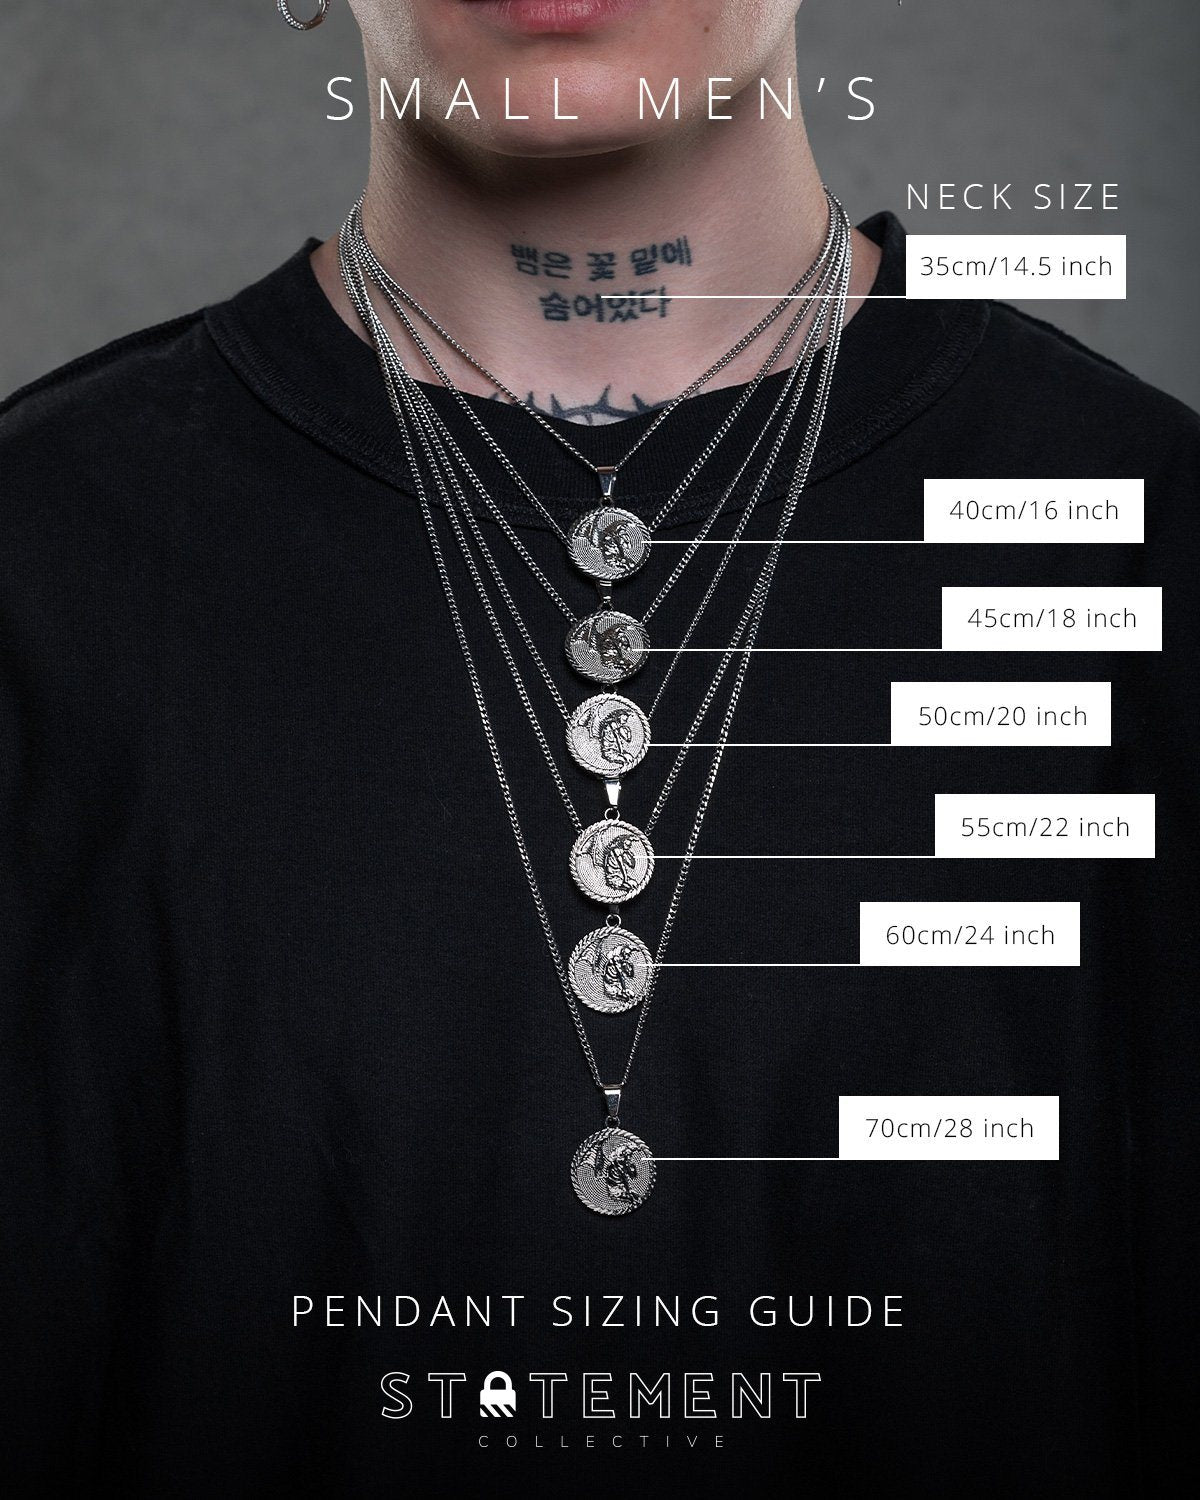 Small mens sizing guide by statement 